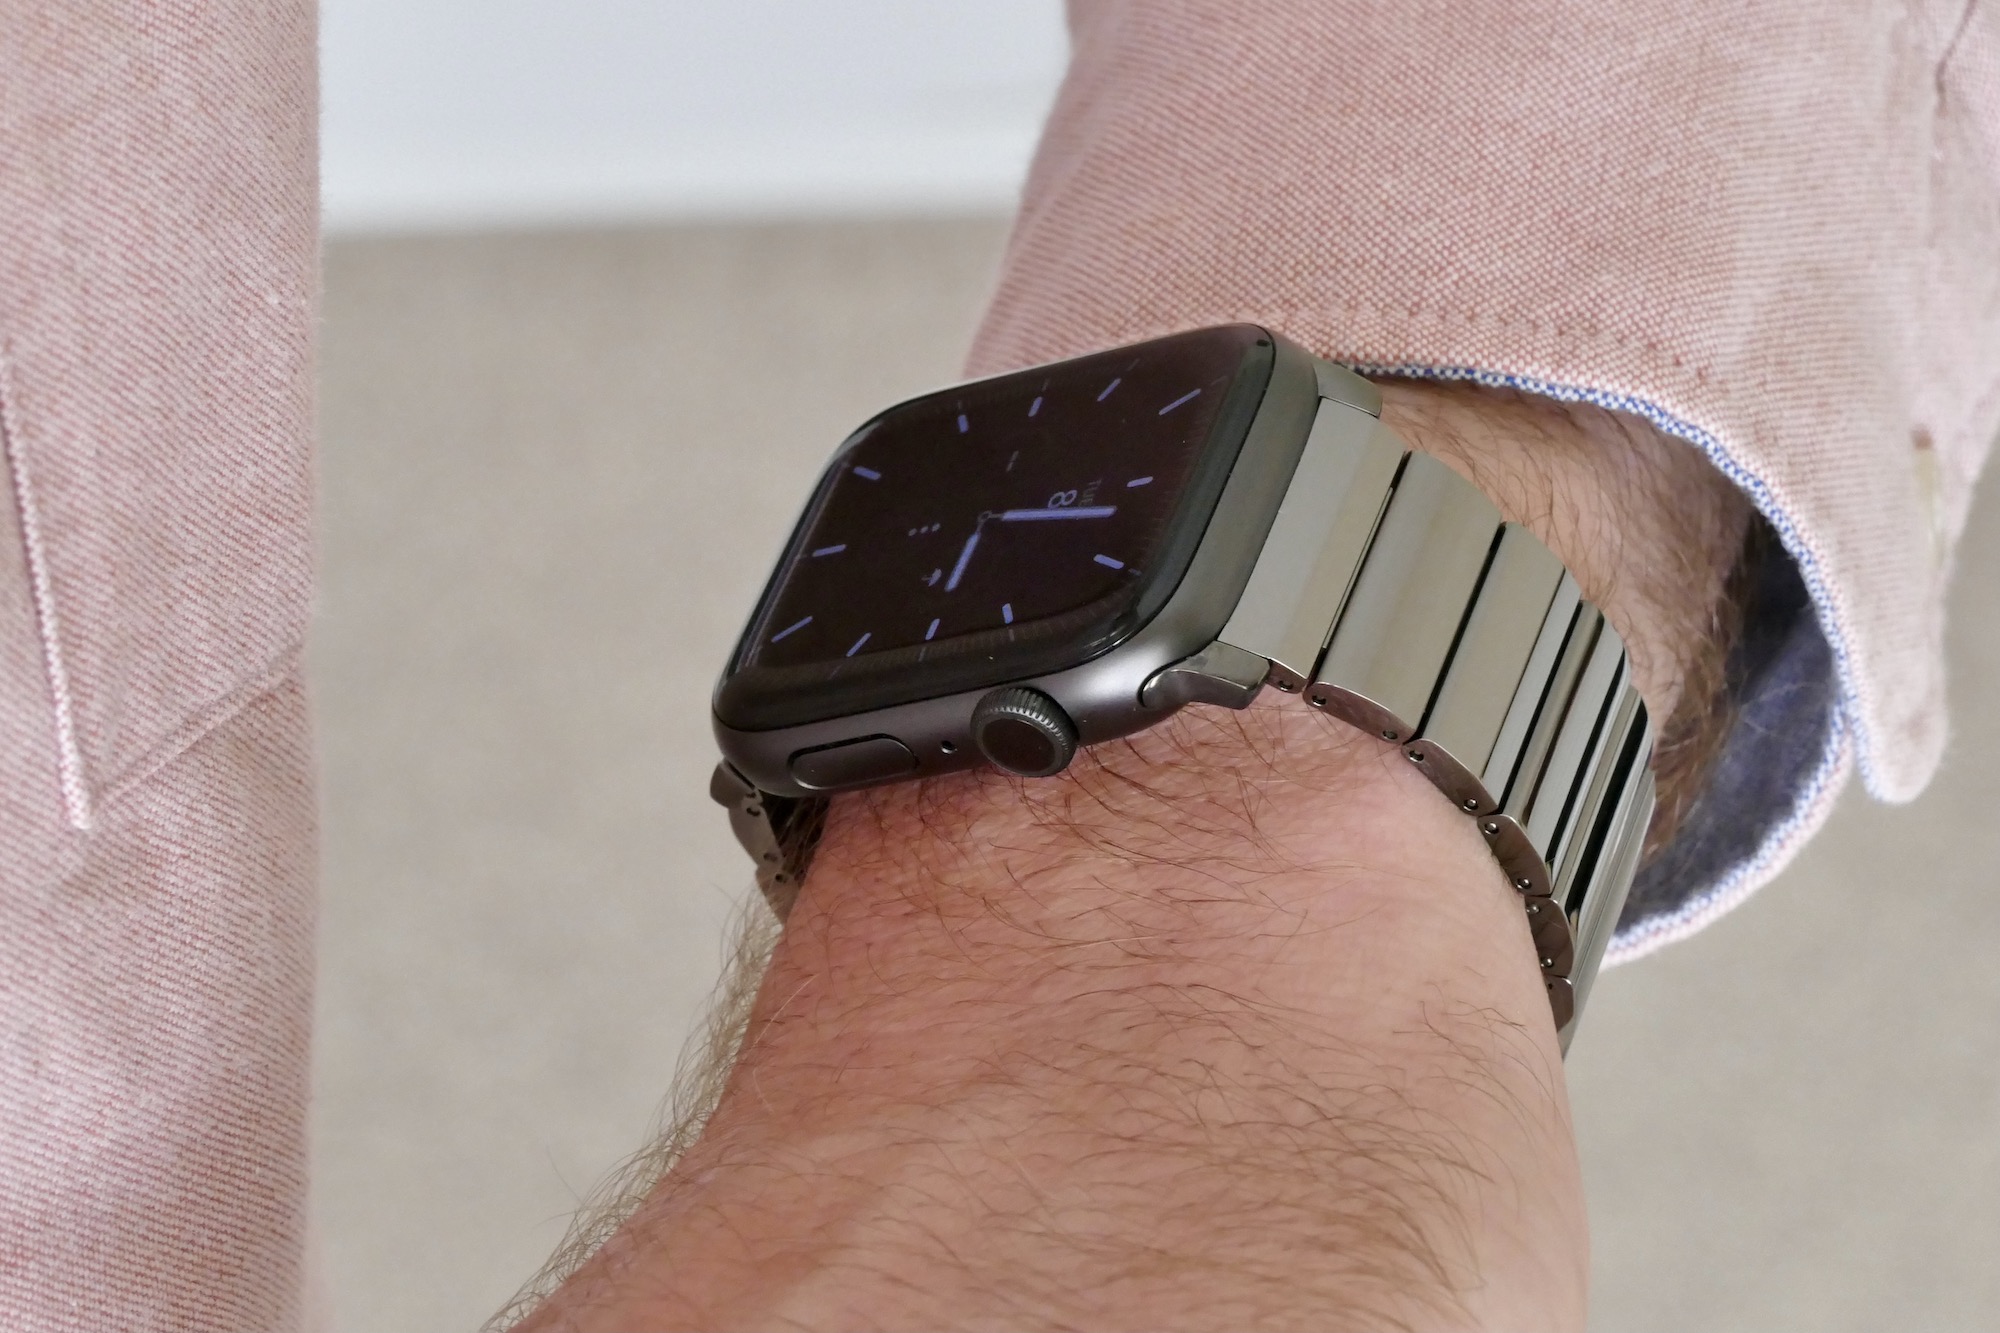 nomad titanium steel band apple watch hands on photos price release date space grey wrist